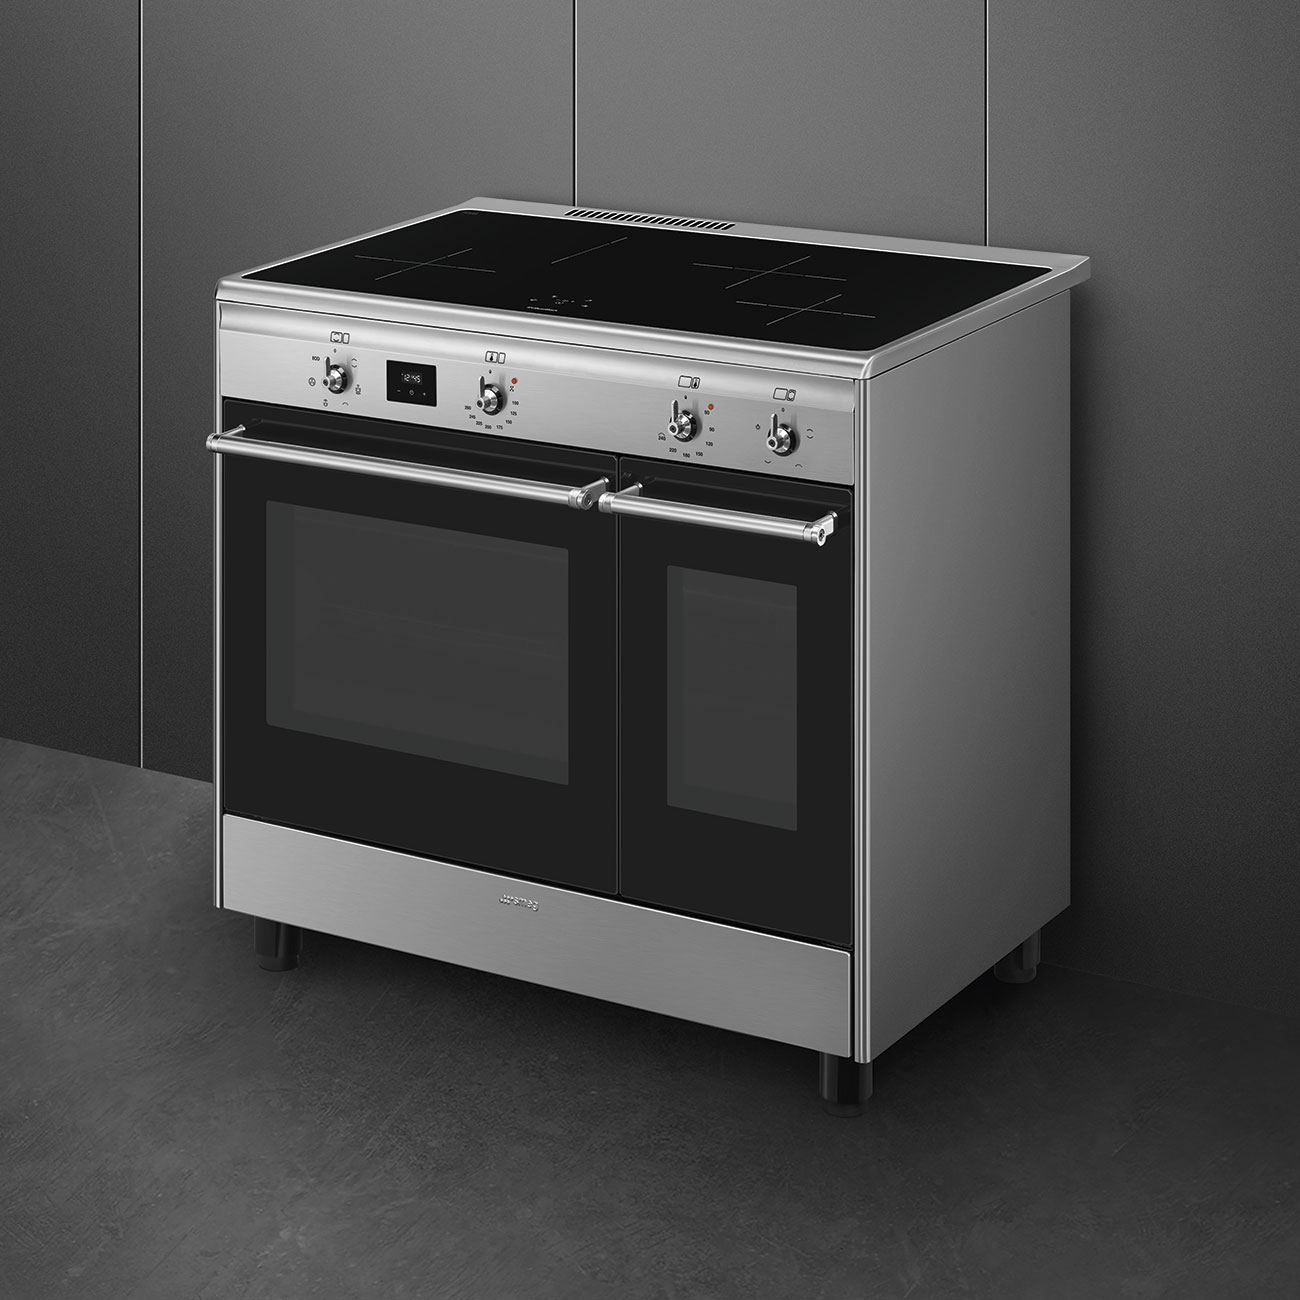 Smeg Stainless steel Cooker with Induction Hob_2